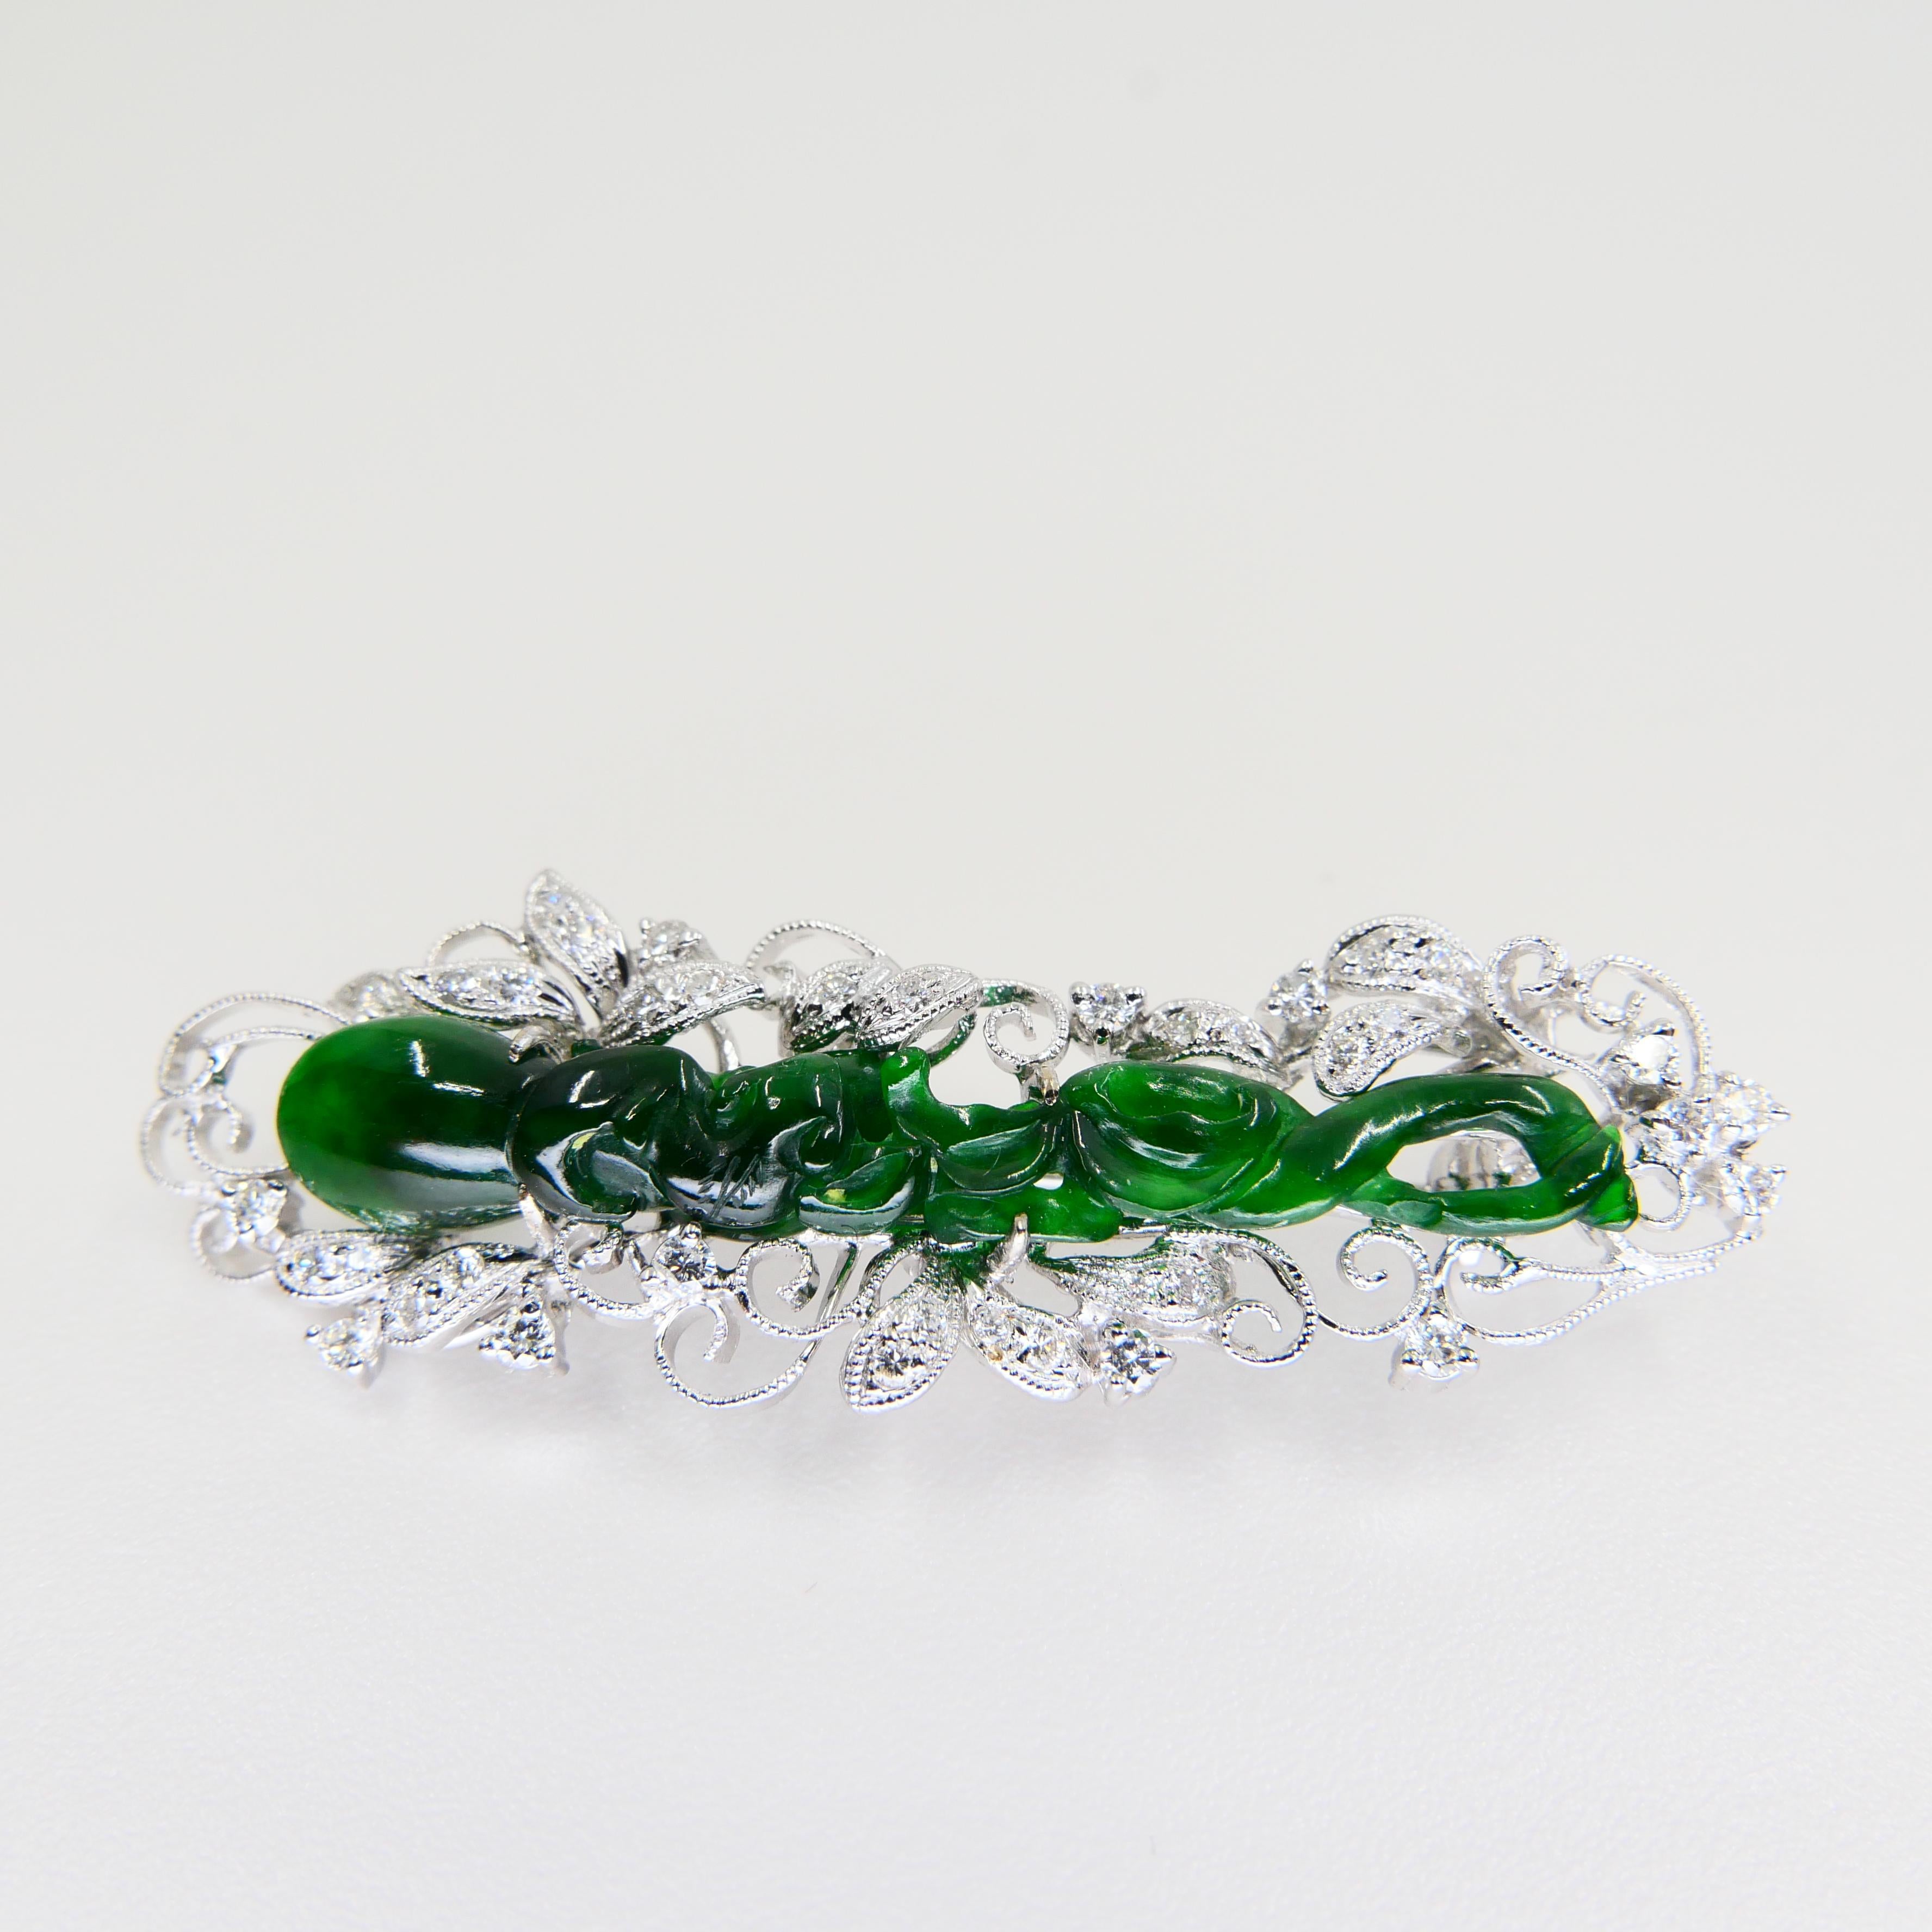 Certified Intense Green Carved Jade & Diamond Brooch, Close to Imperial Green For Sale 8